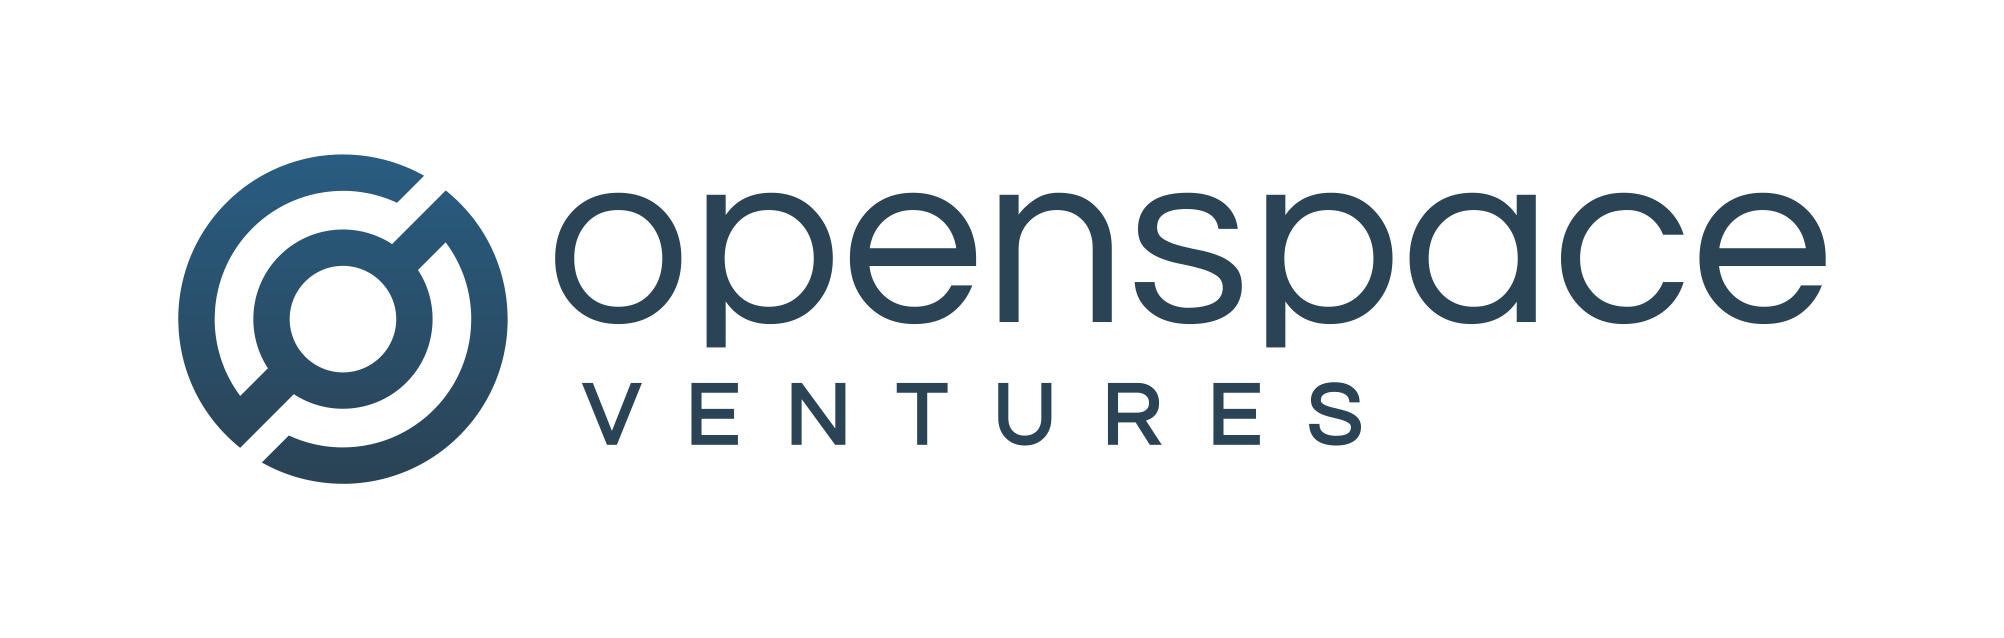 Google Ventures Logo - Openspace Ventures. Southeast Asia Early Stage Technology Investor